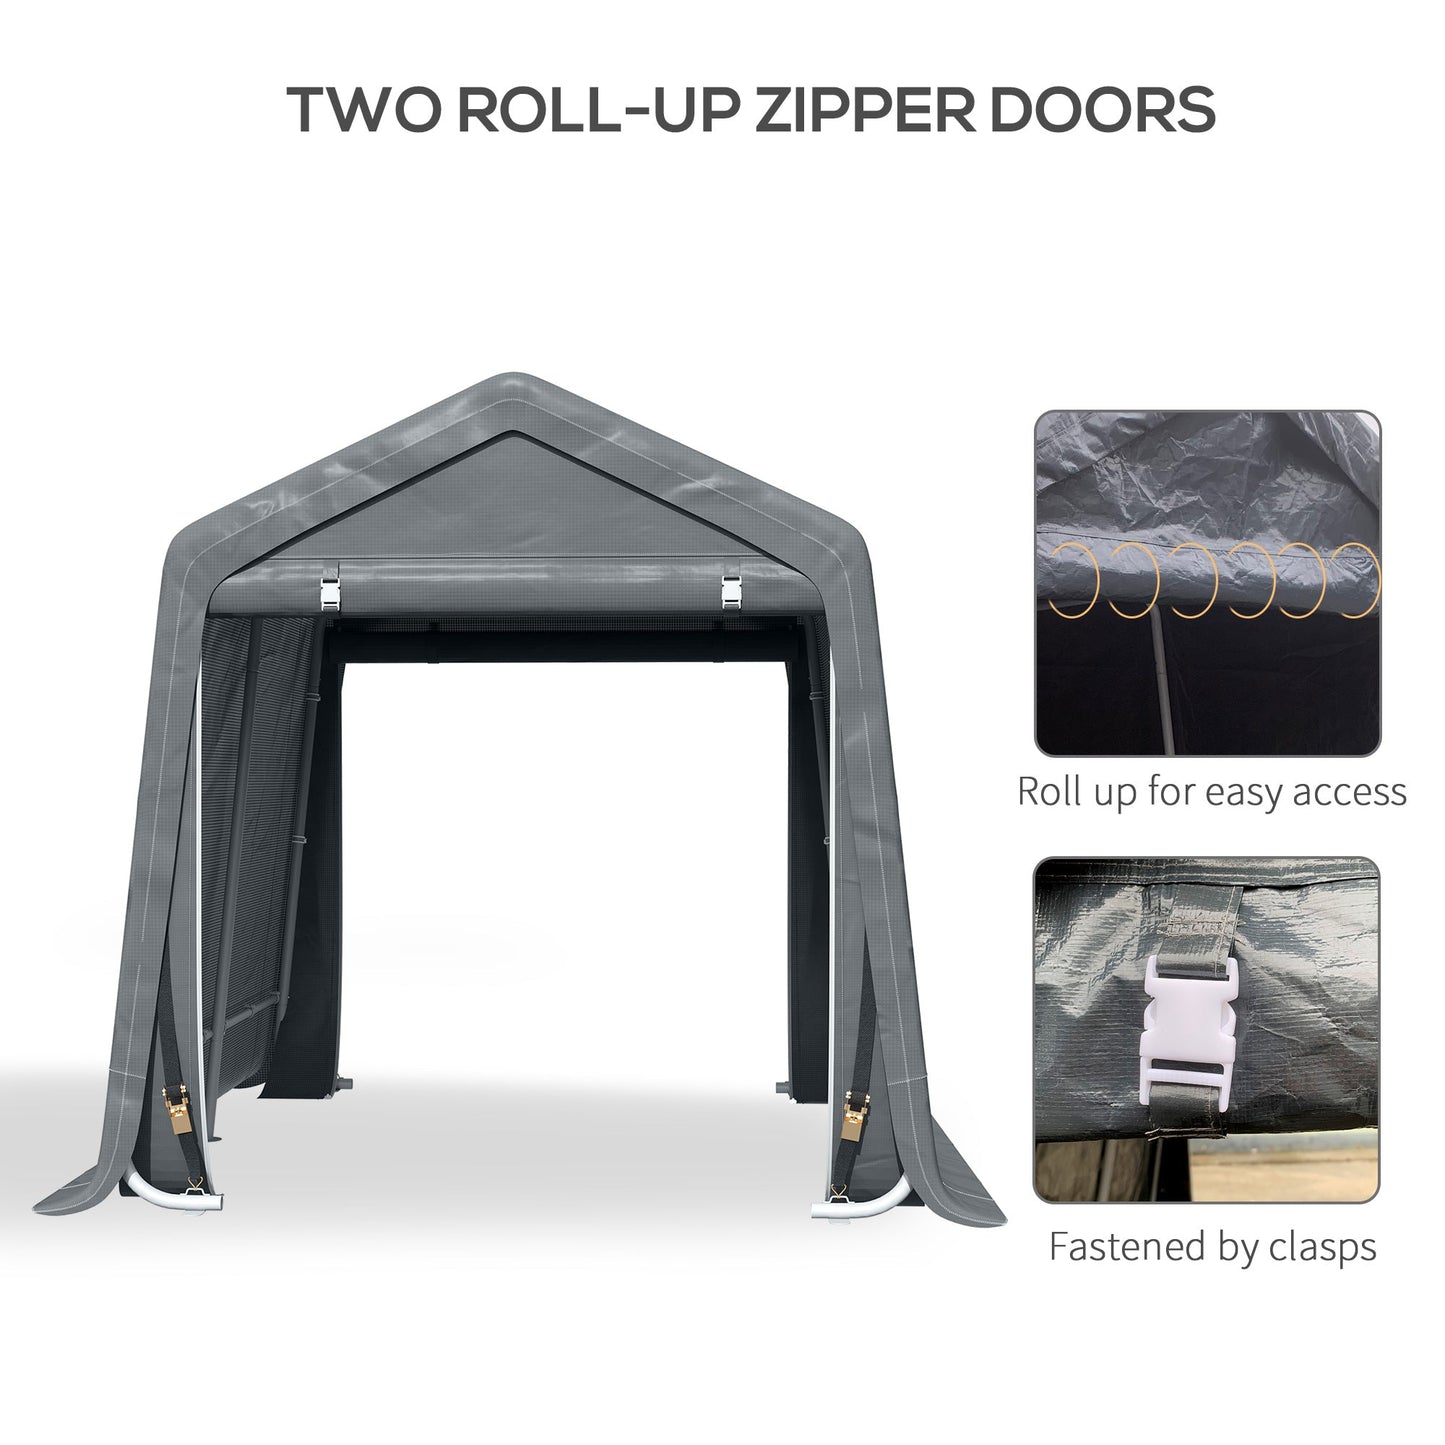 Outdoor and Garden-7.9' x 6.6' Garden Storage Tent, Heavy Duty Bike Shed, Patio Storage Shelter w/ Metal Frame and Double Zipper Doors, Dark Grey - Outdoor Style Company